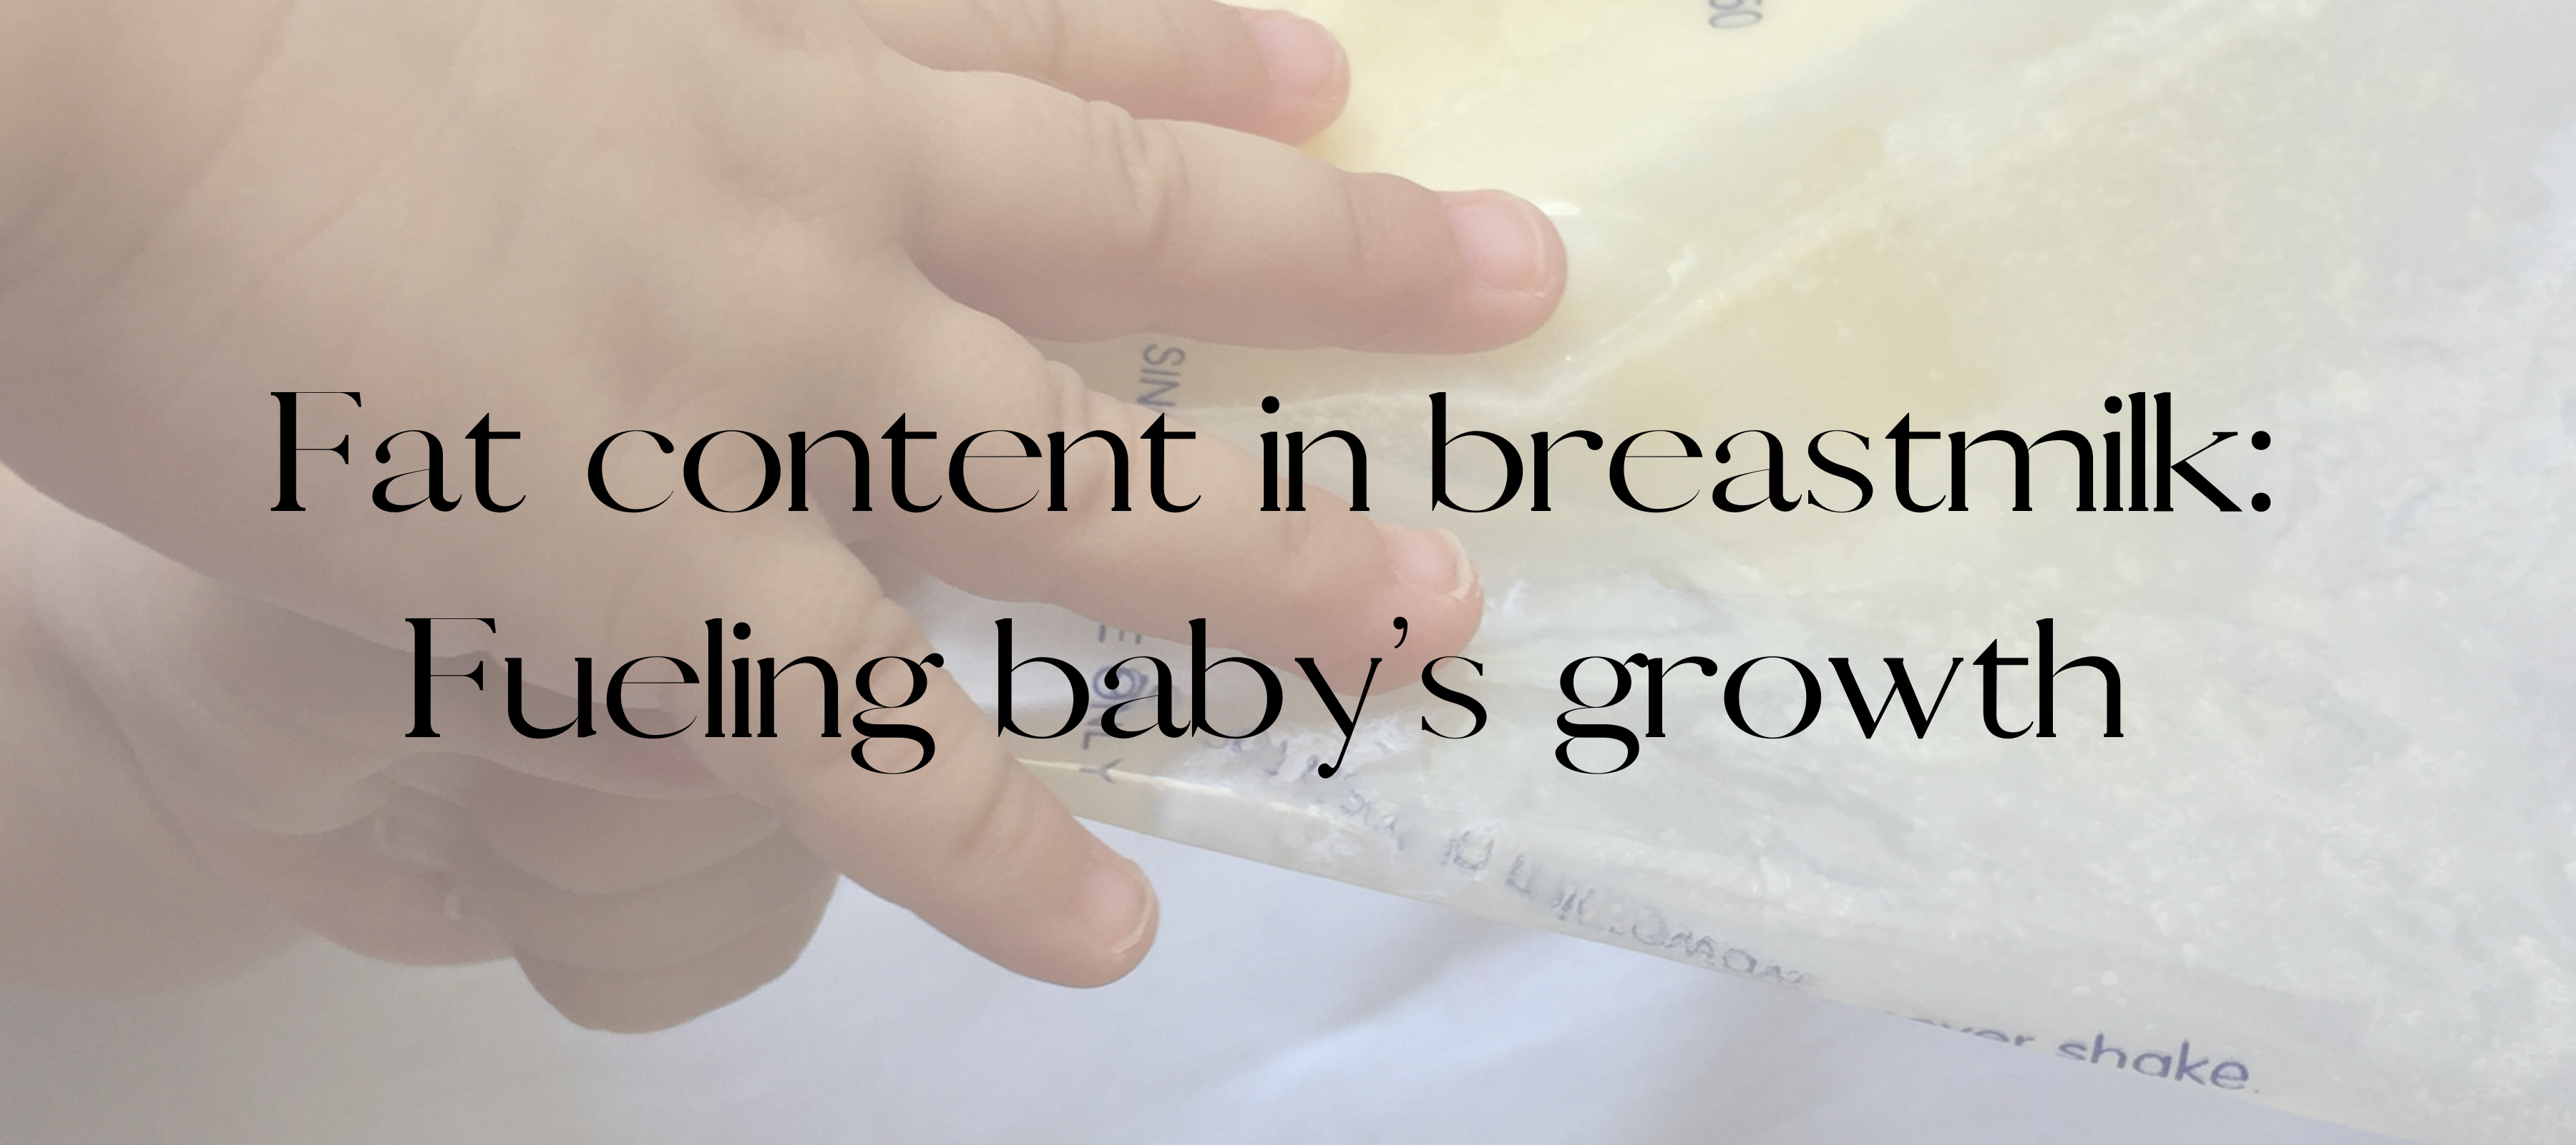 Fat content in breastmilk: Fueling Baby's Growth